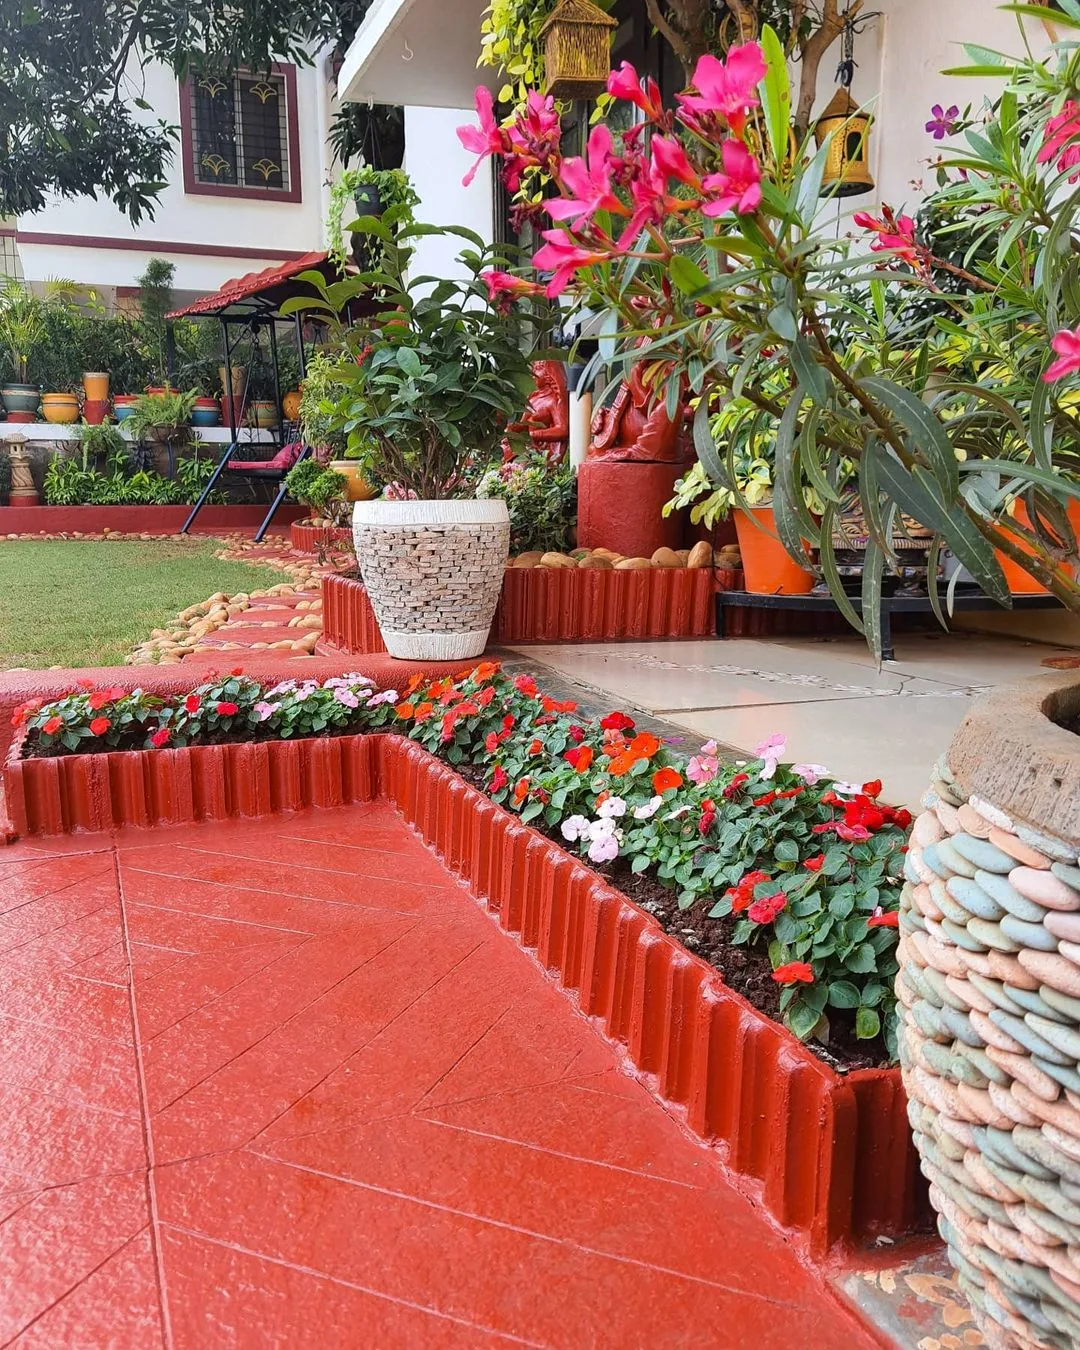 red patio surrounded by red and white impatiens in raised beds